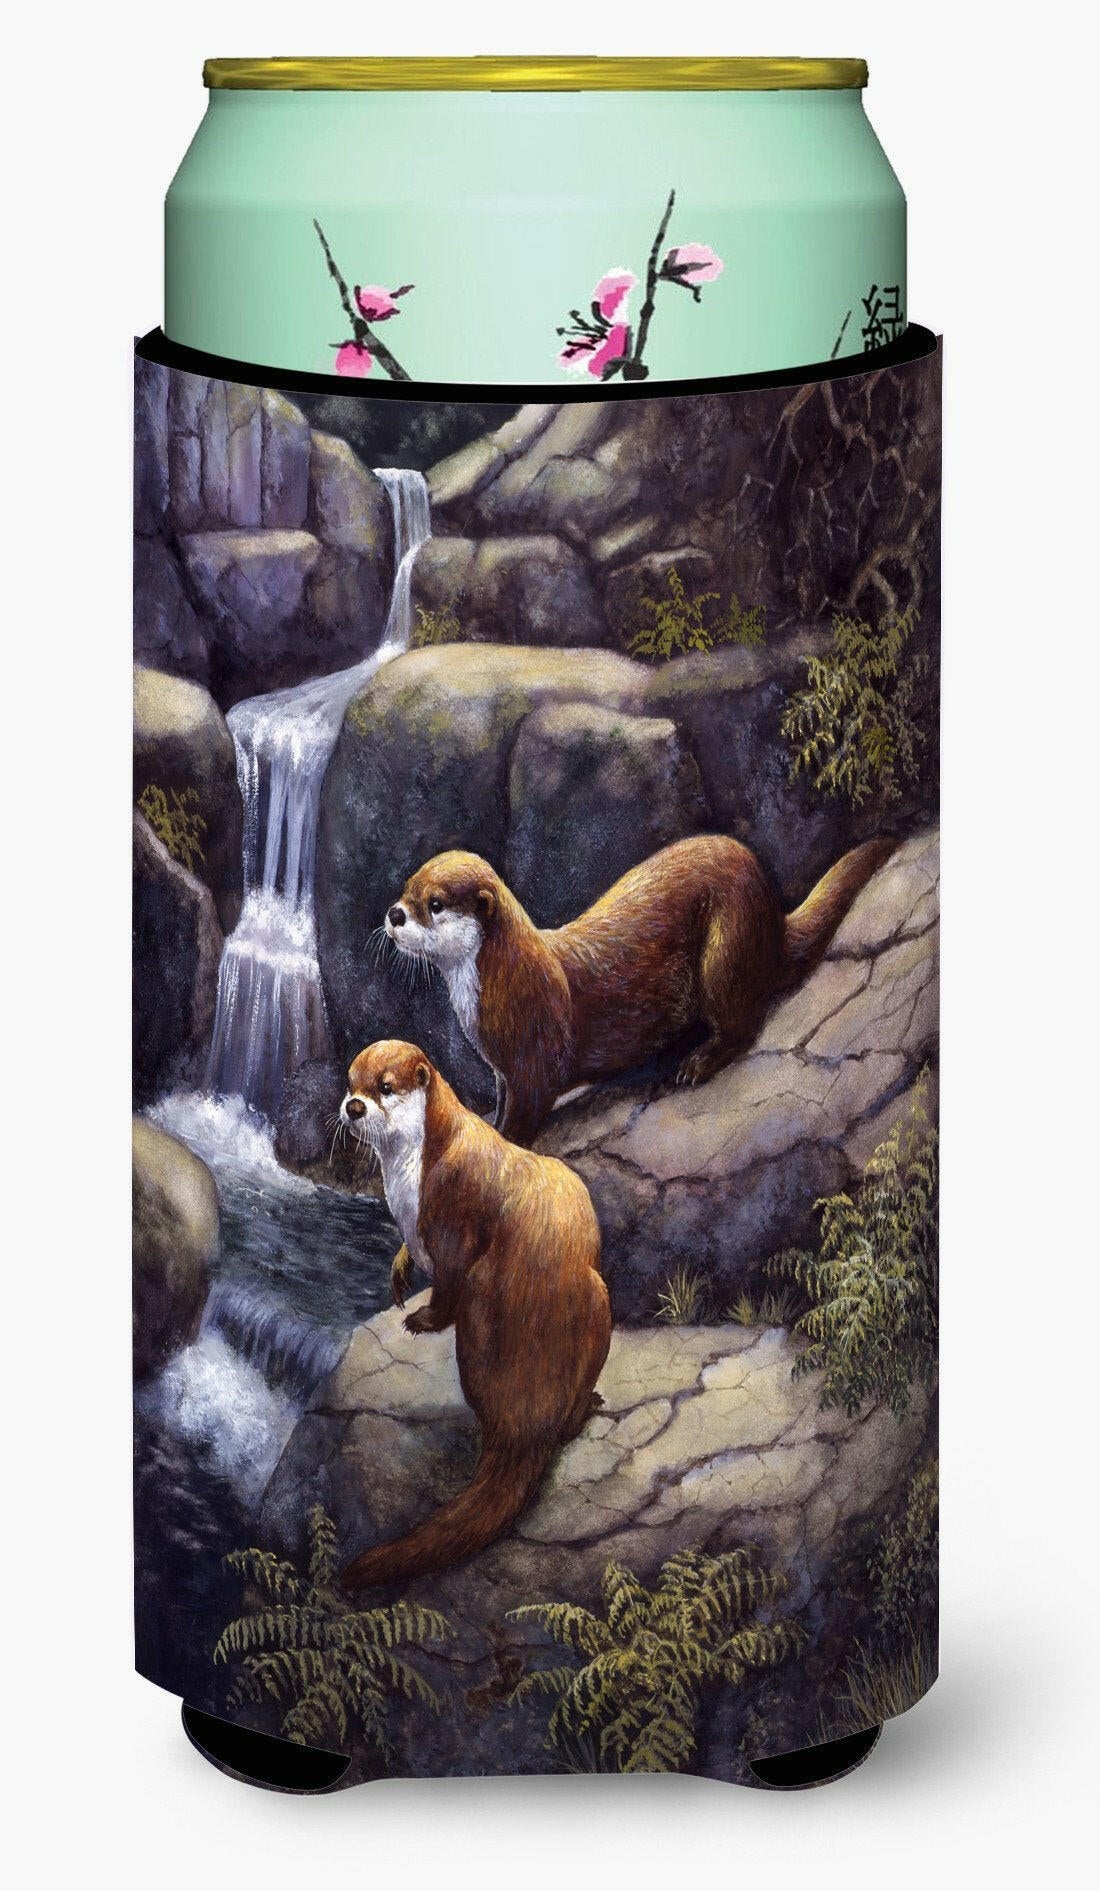 Otters by the Waterfall by Daphne Baxter Tall Boy Beverage Insulator Hugger BDBA0293TBC by Caroline's Treasures